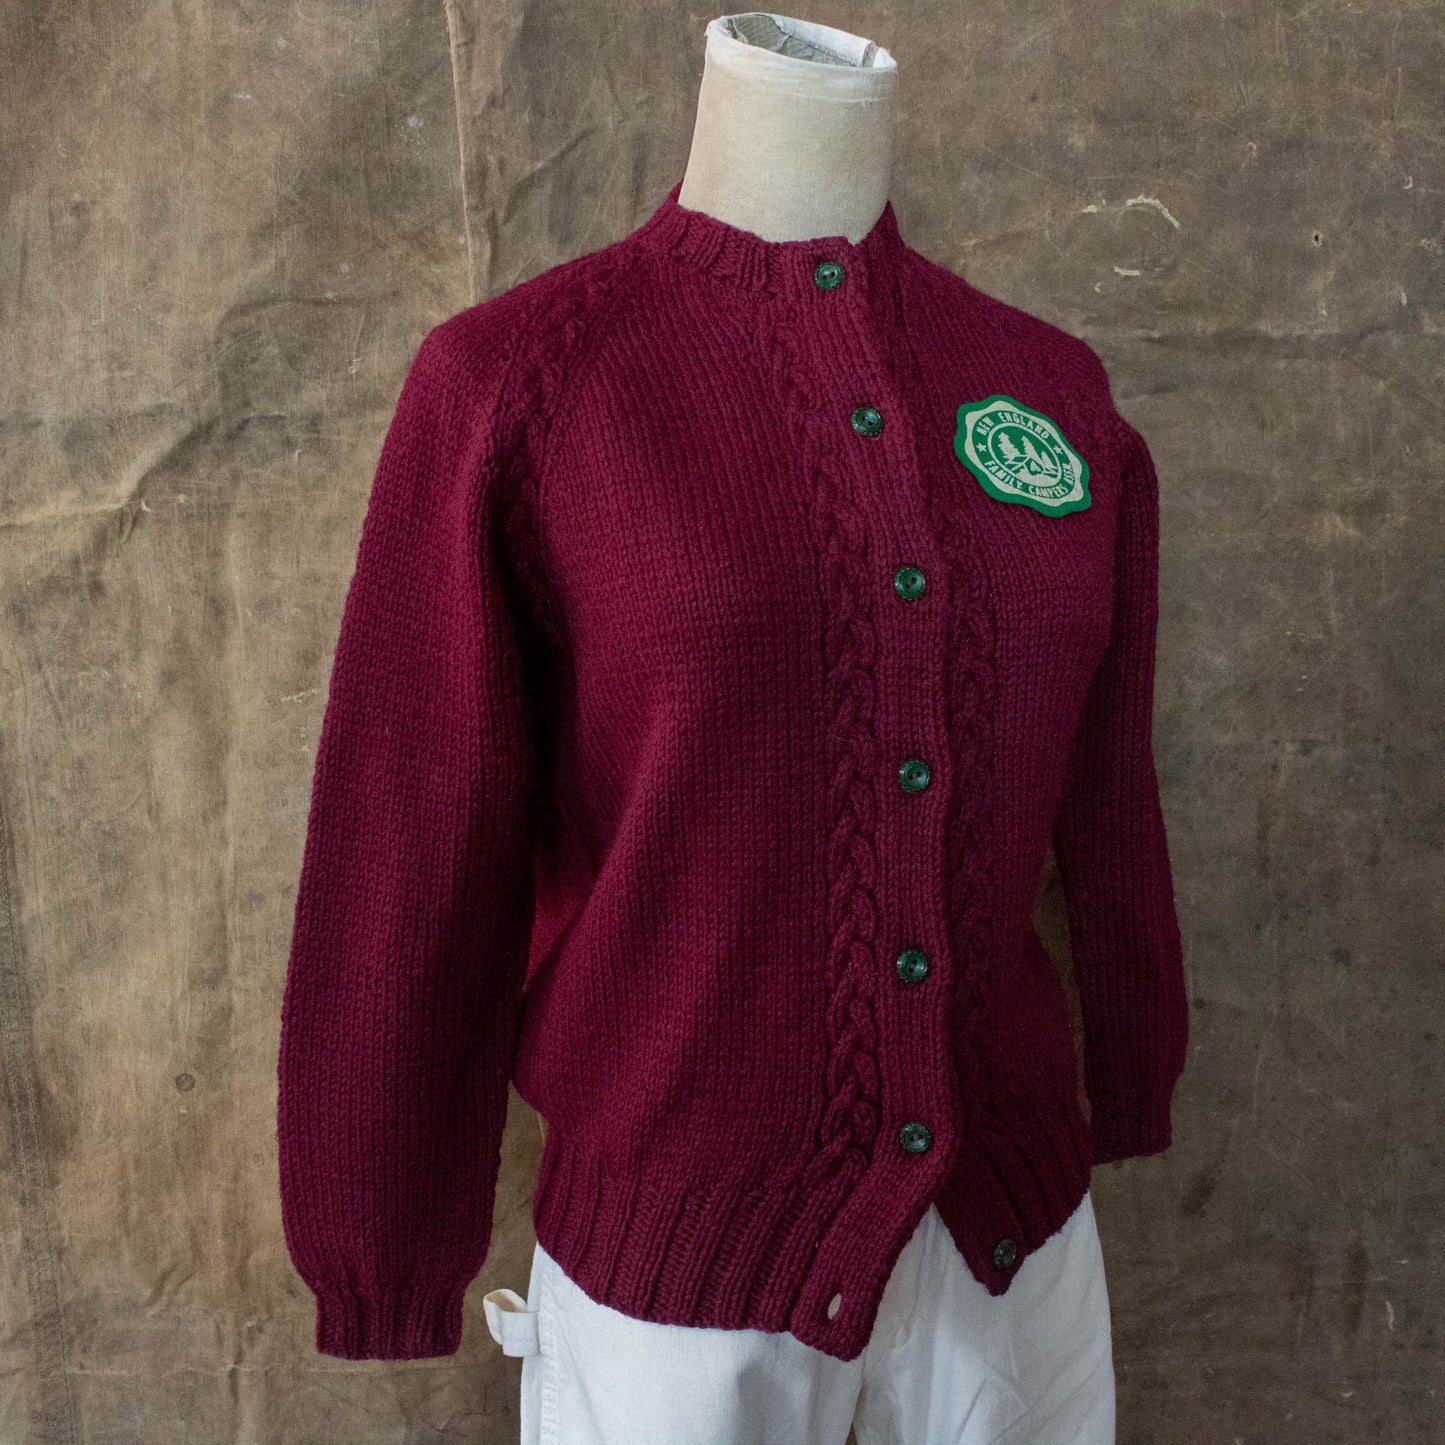 Vintage Small Medium Burgundy Wool Sweater with Camp Patch